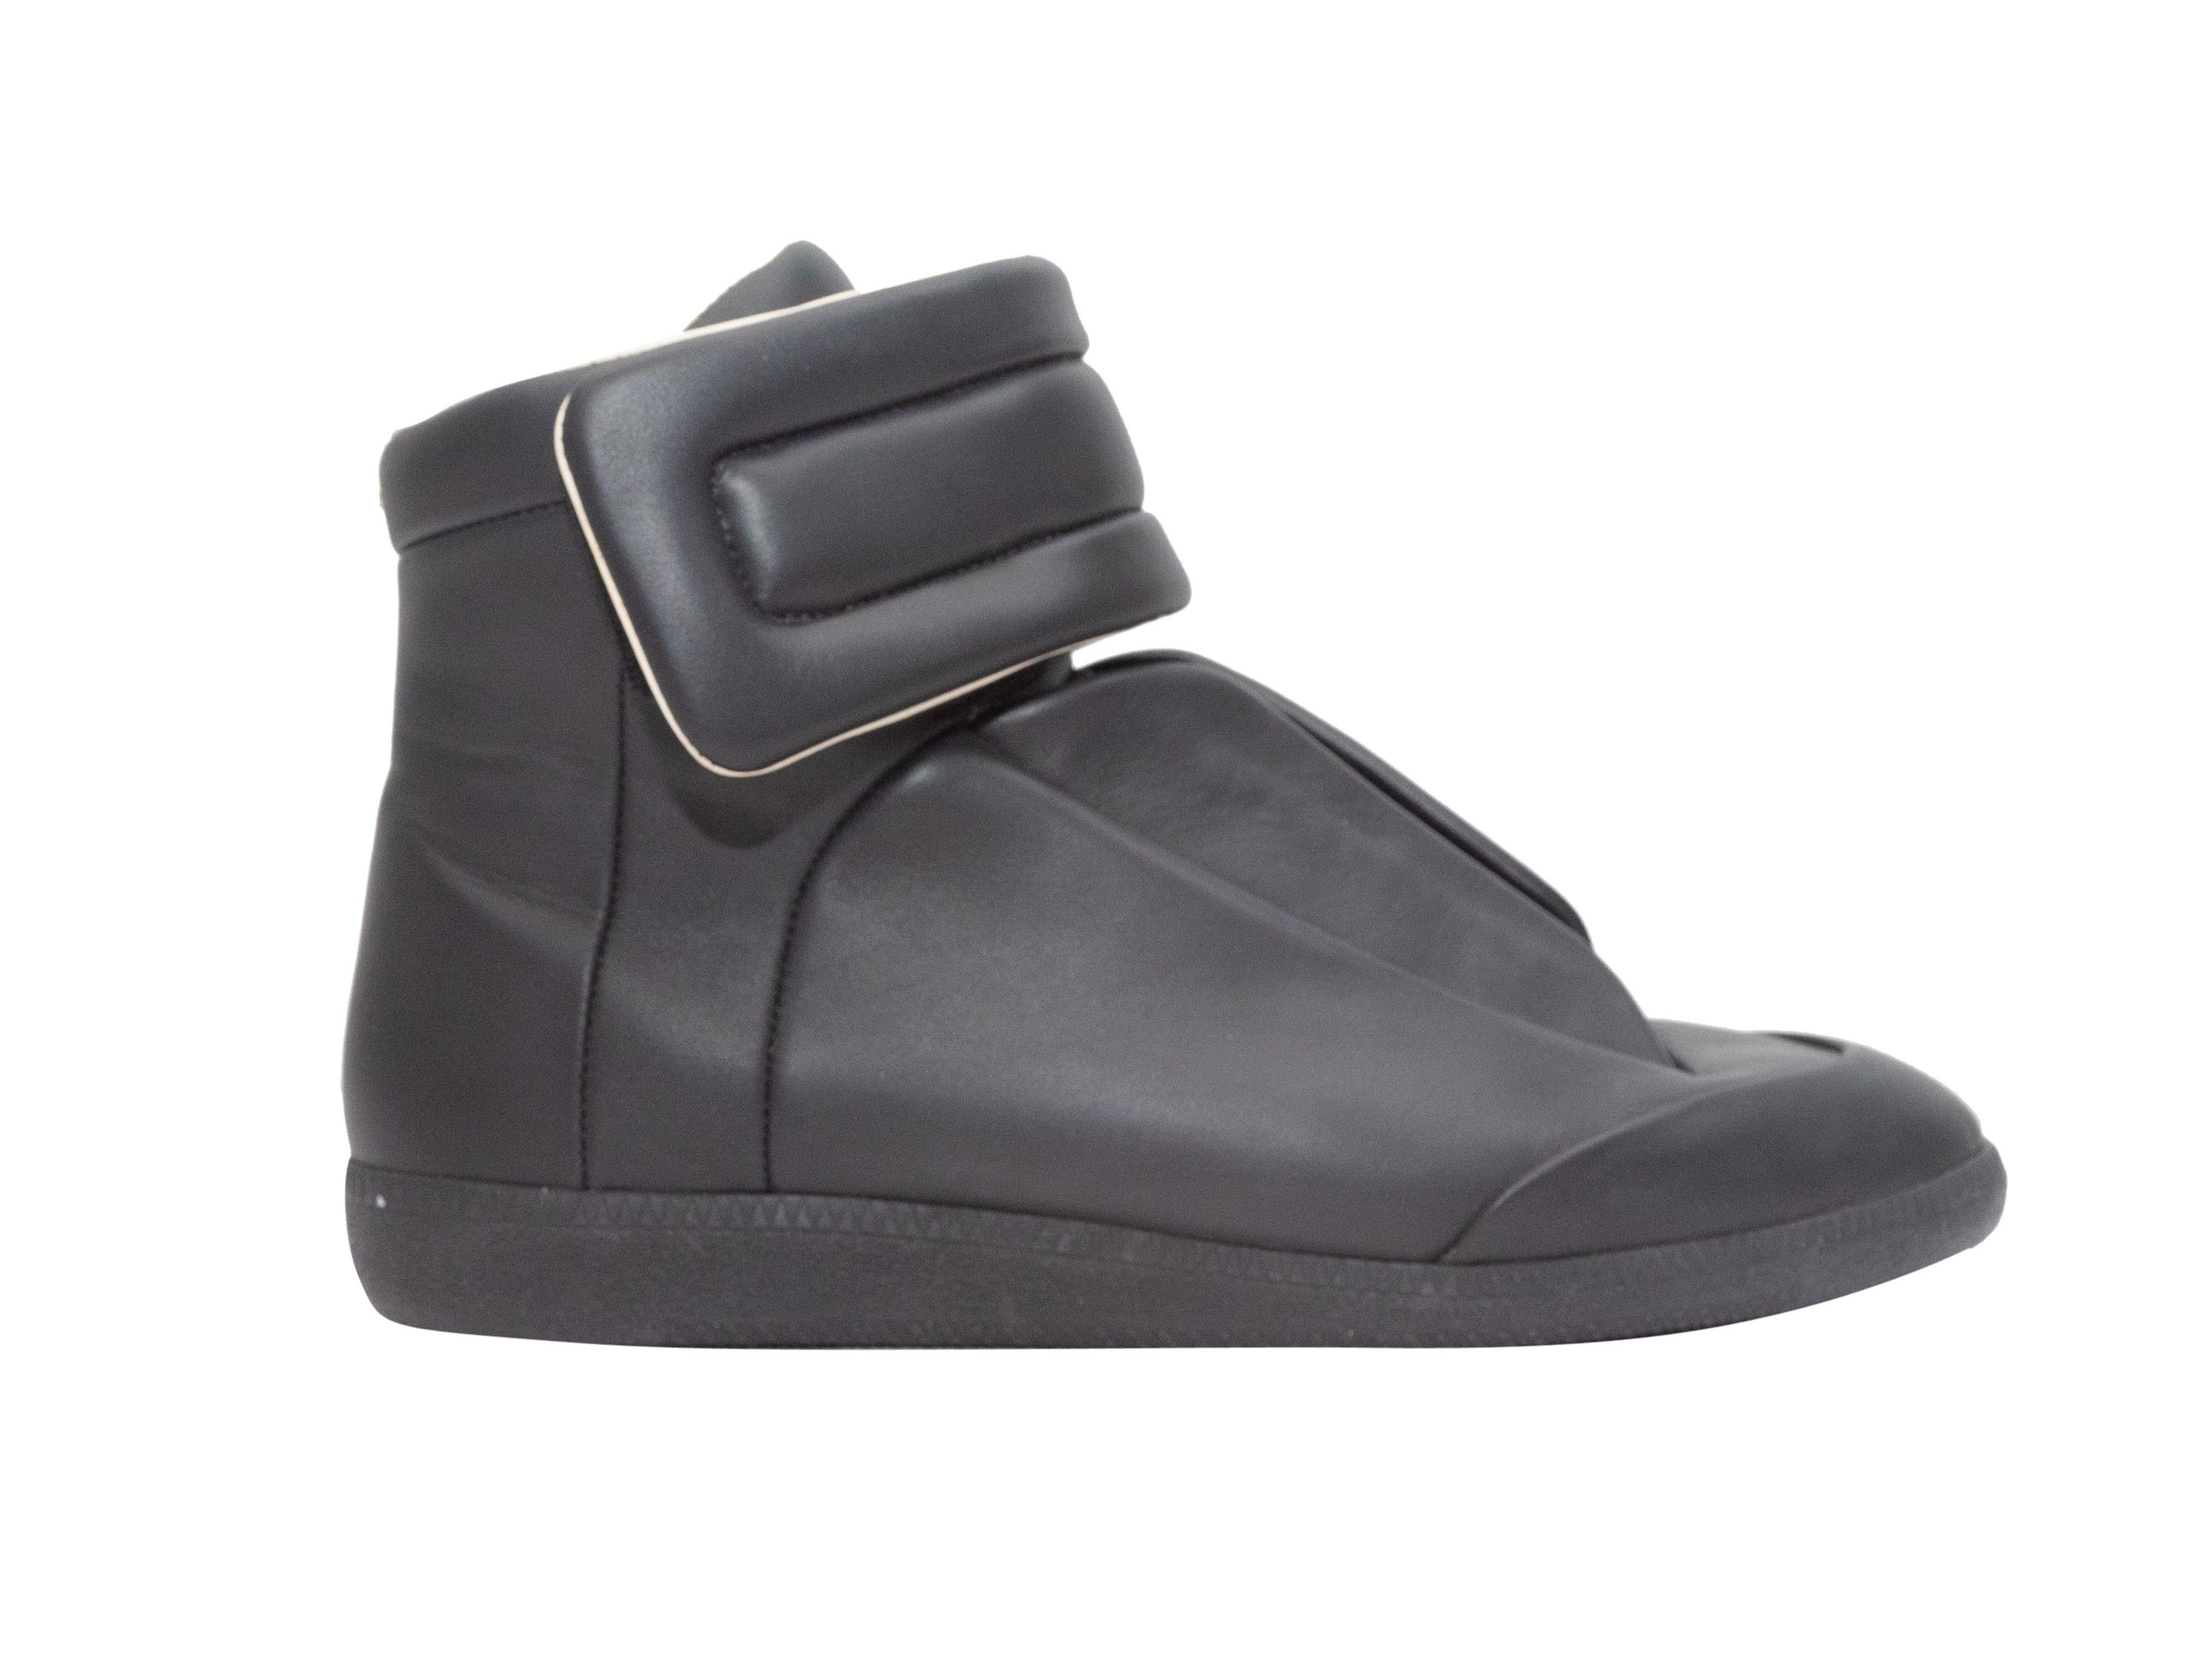 Maison Margiela Black High-Top Leather Sneakers 2